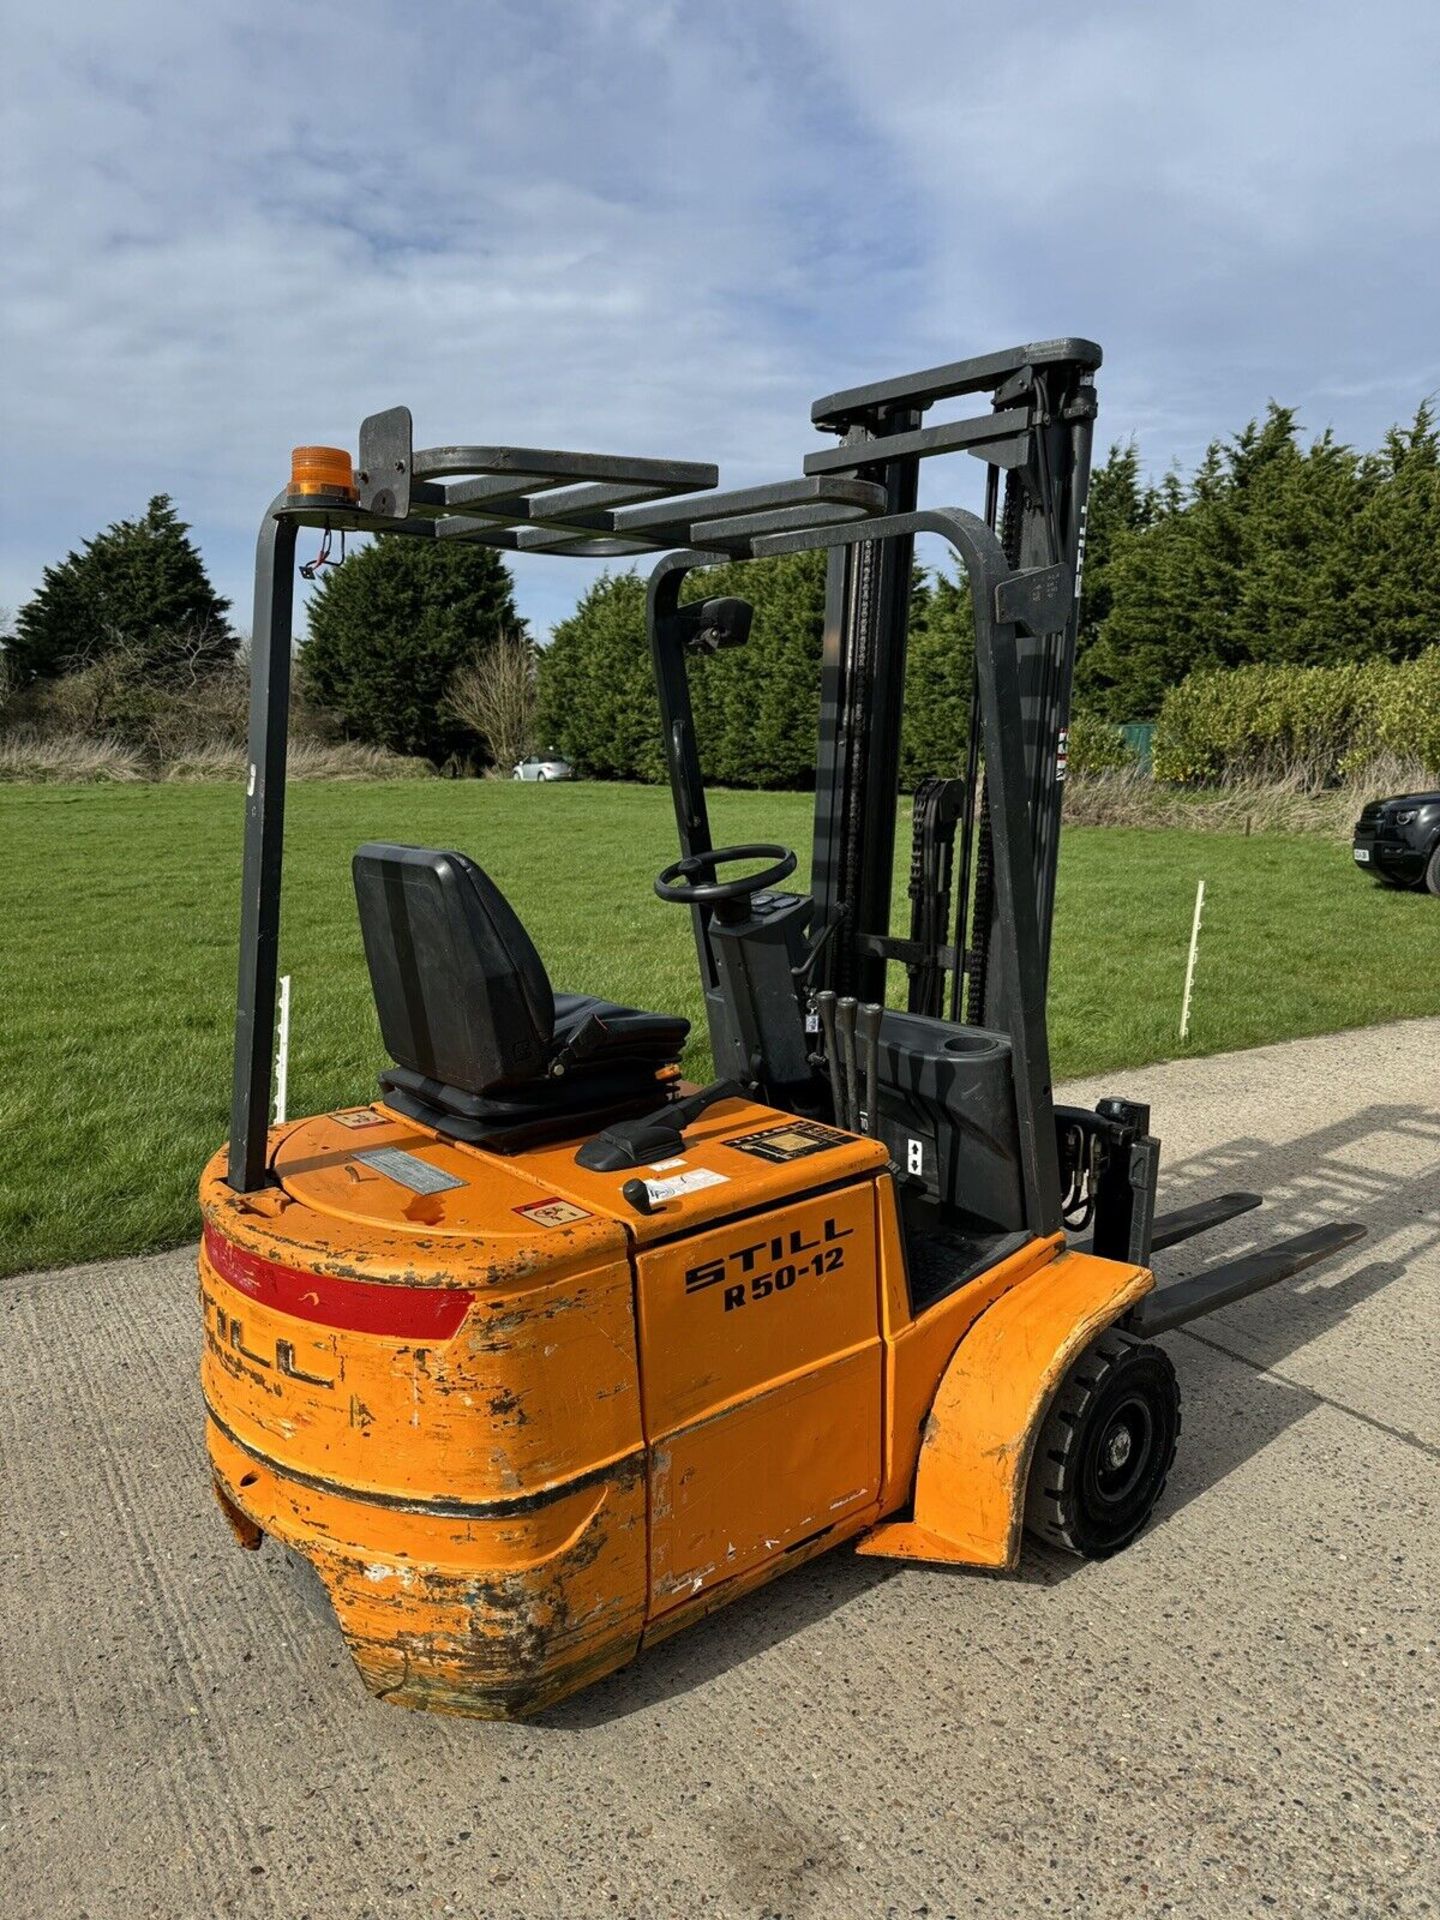 STILL, 1.5 Electric Forklift Truck - Image 2 of 4